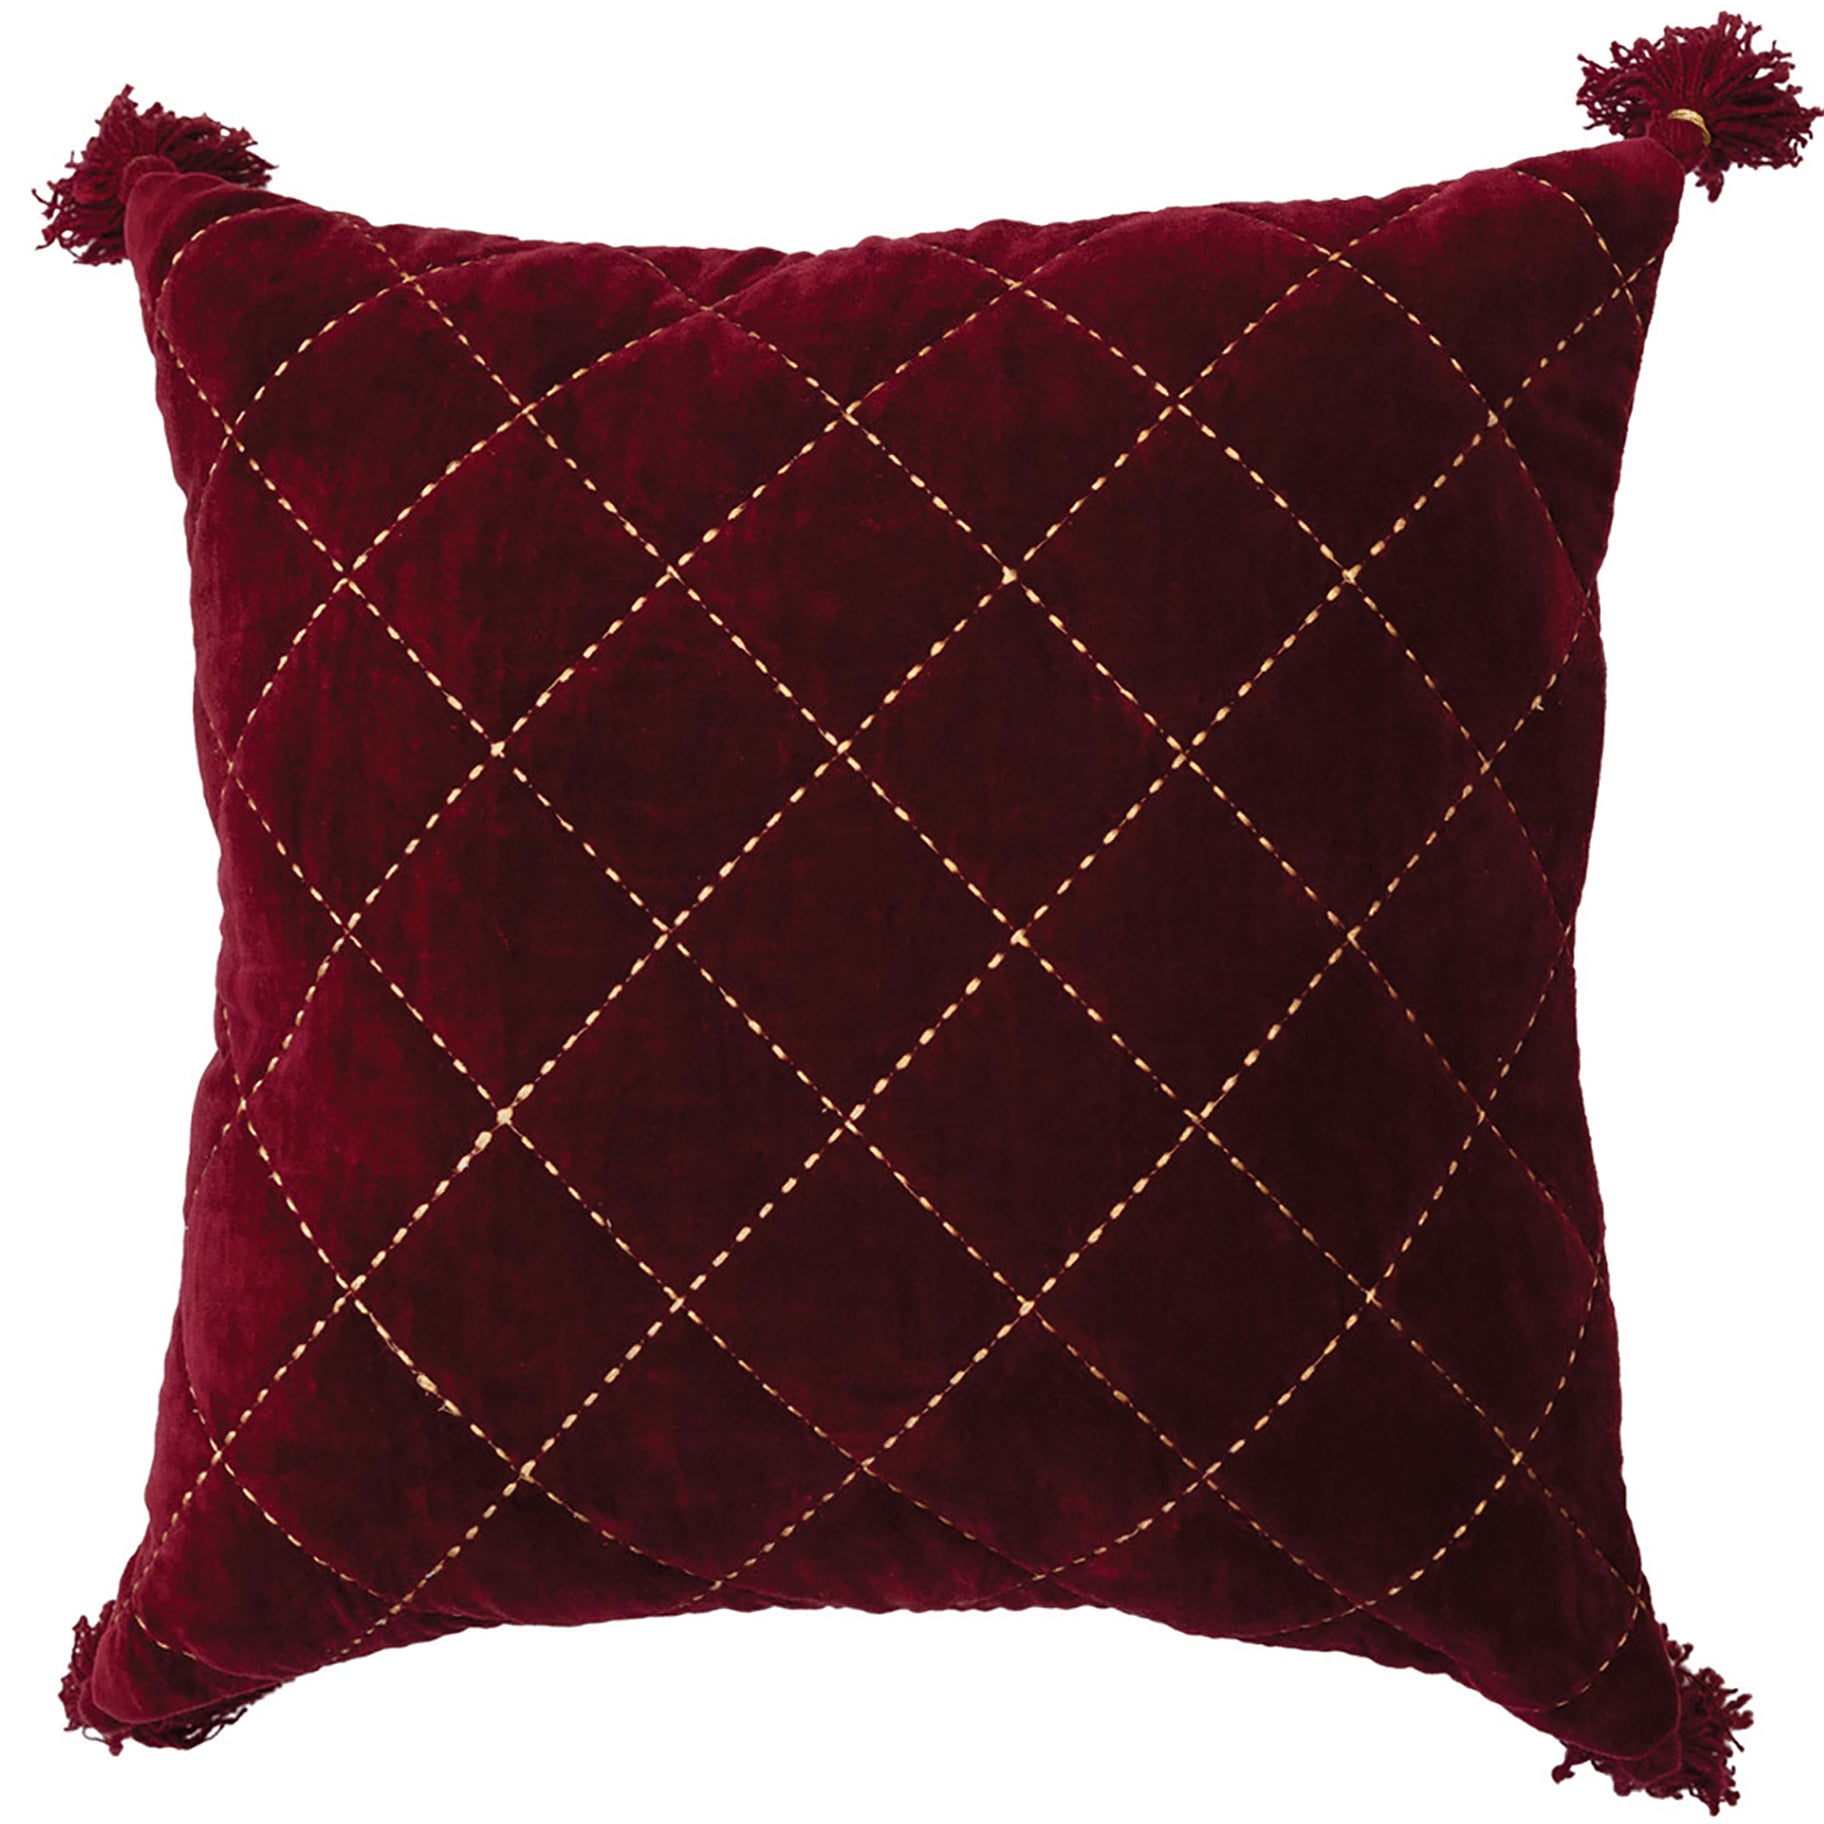 Burgundy Red Quilted Velvet Cotton Pillow With Gold Embroidery